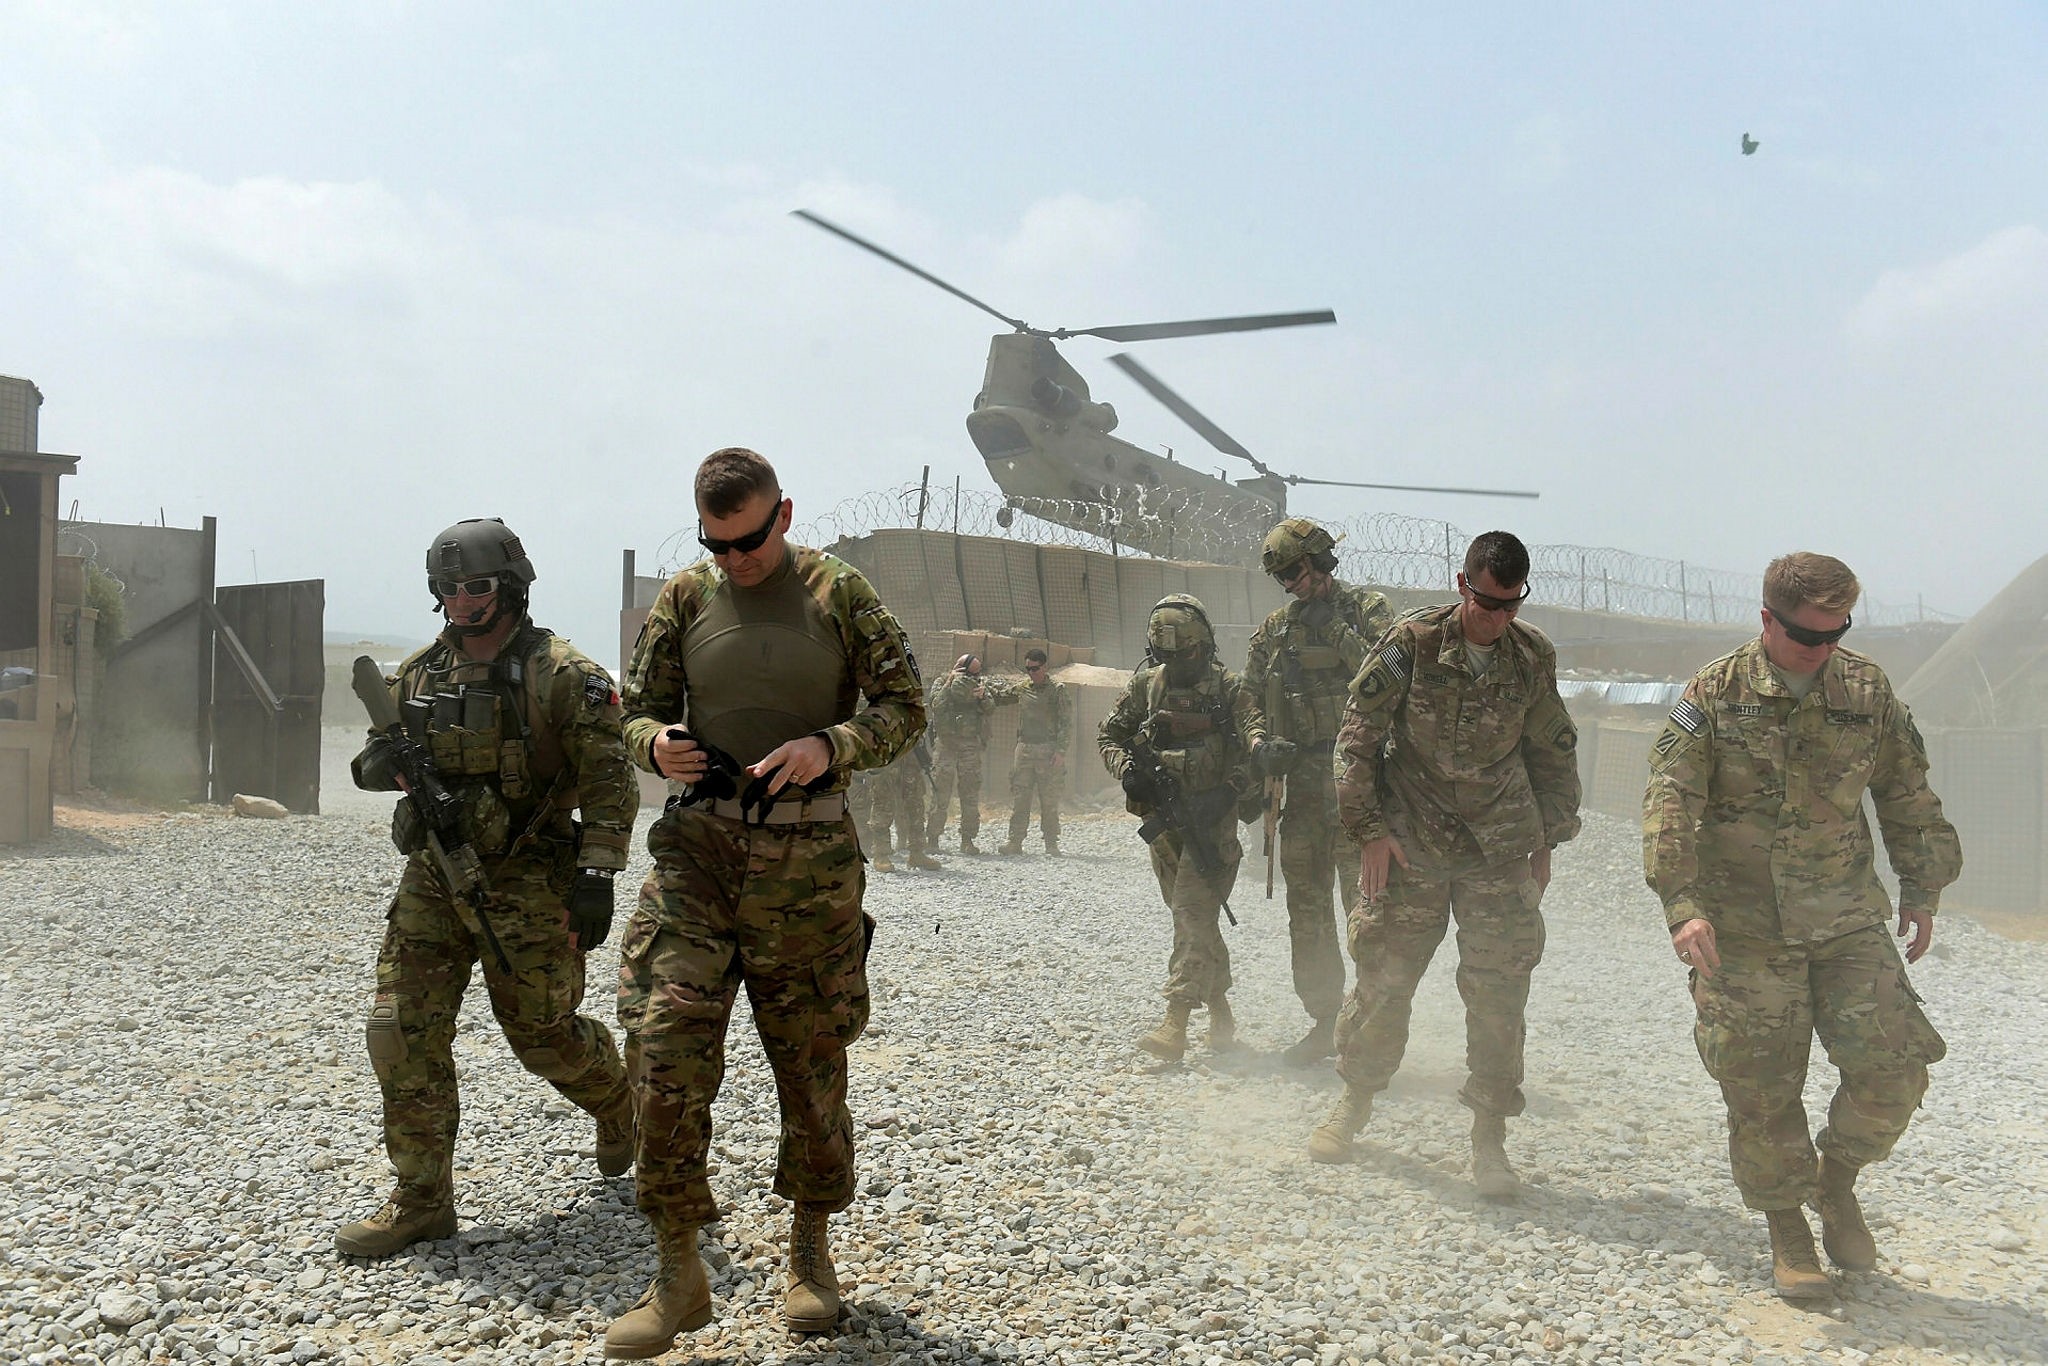 U.S. army soldiers walk as a NATO helicopter flies overhead in the Khogyani district in the eastern province of Nangarhar, Afghanistan.